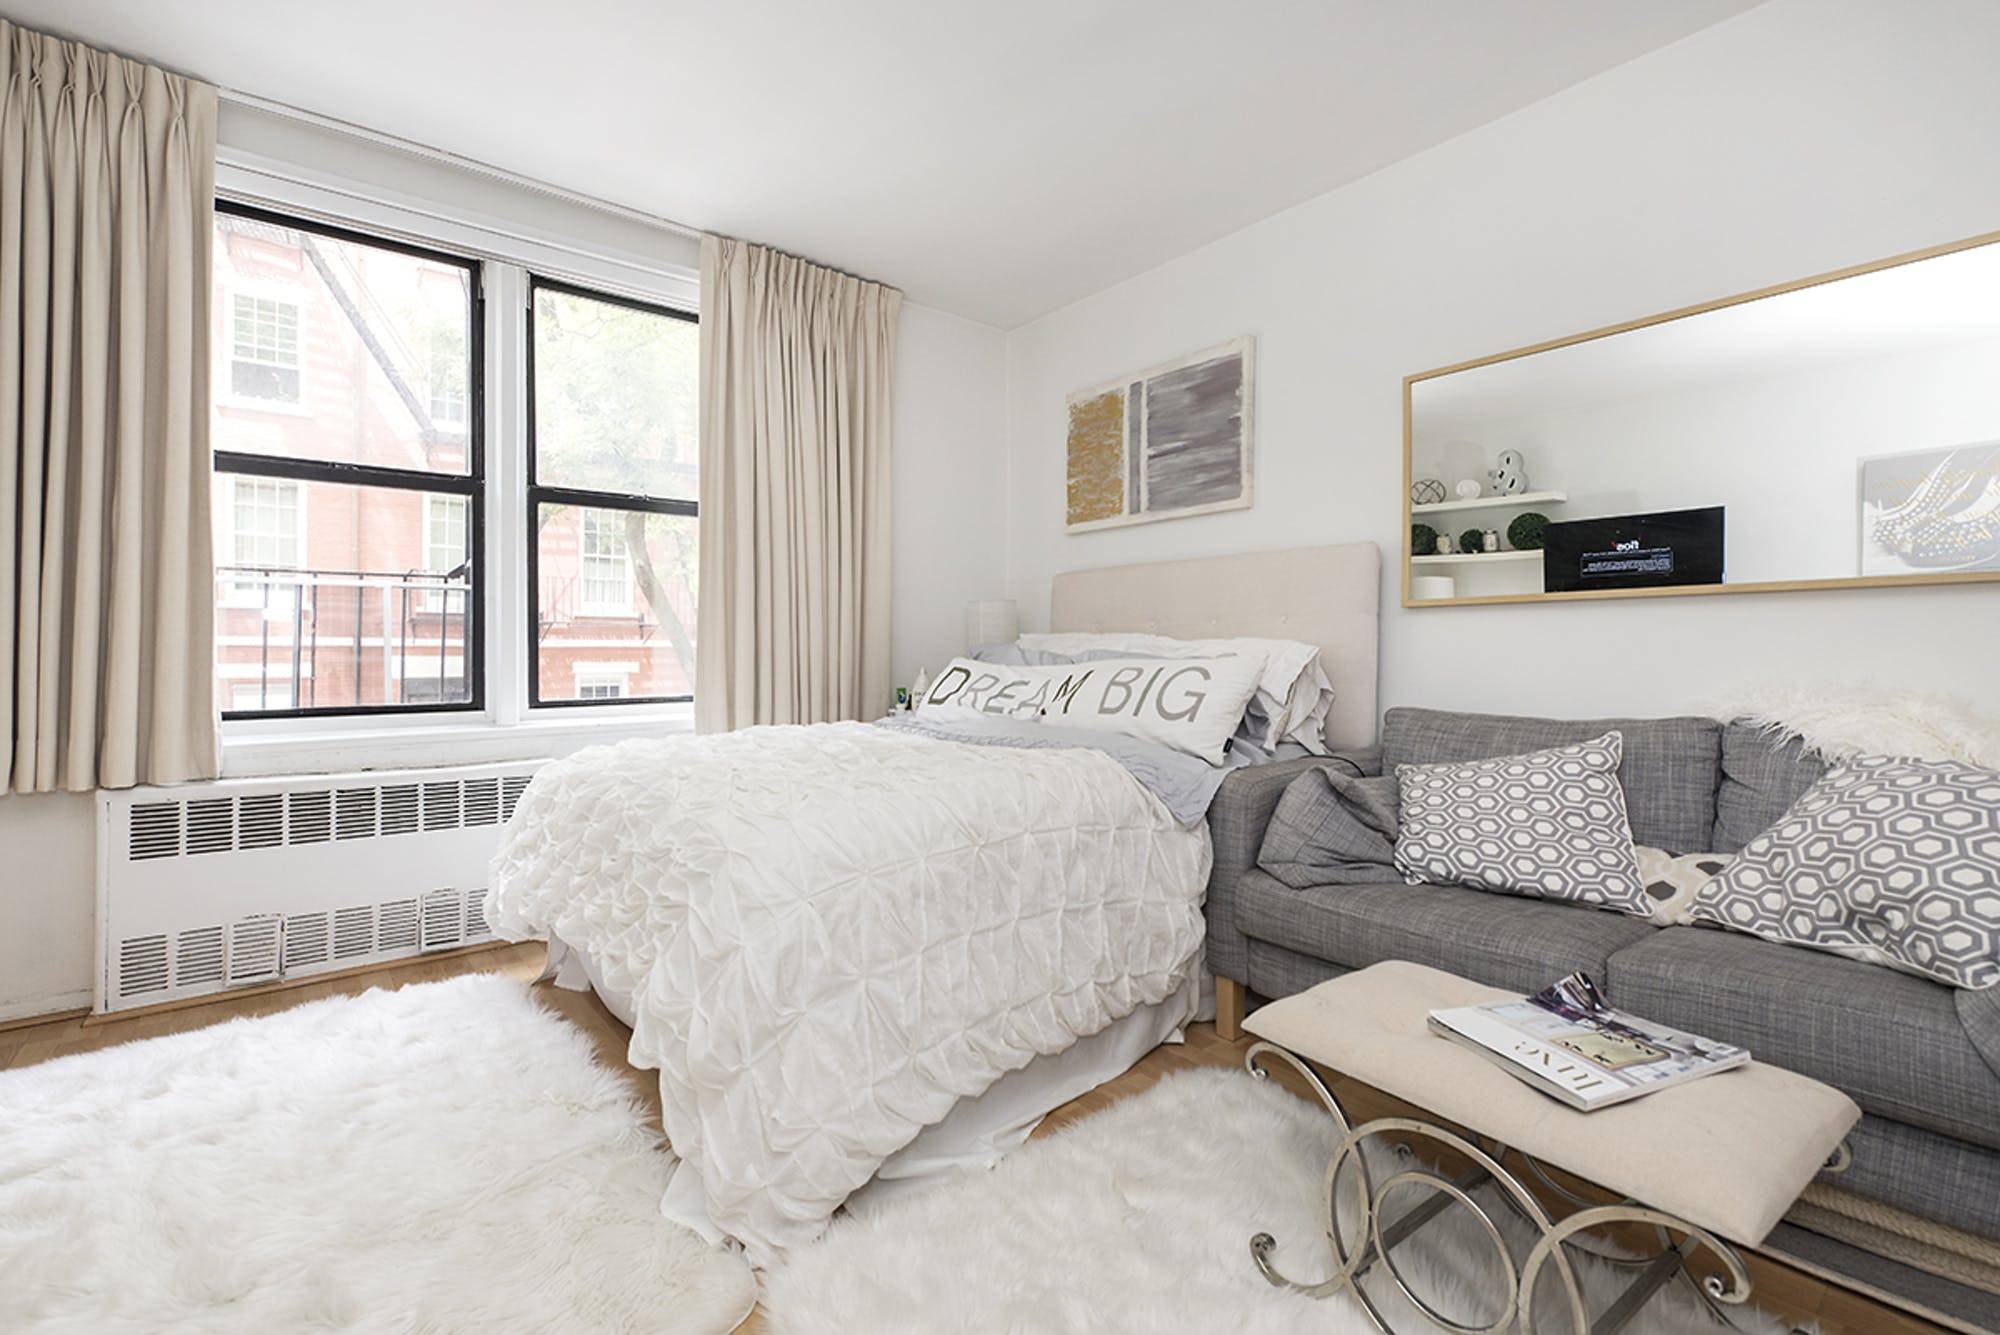 Spacious studio available at 350 Bleecker Street, a doorman elevator building in the heart of the West Village on the corner of Bleecker and Charles Streets.